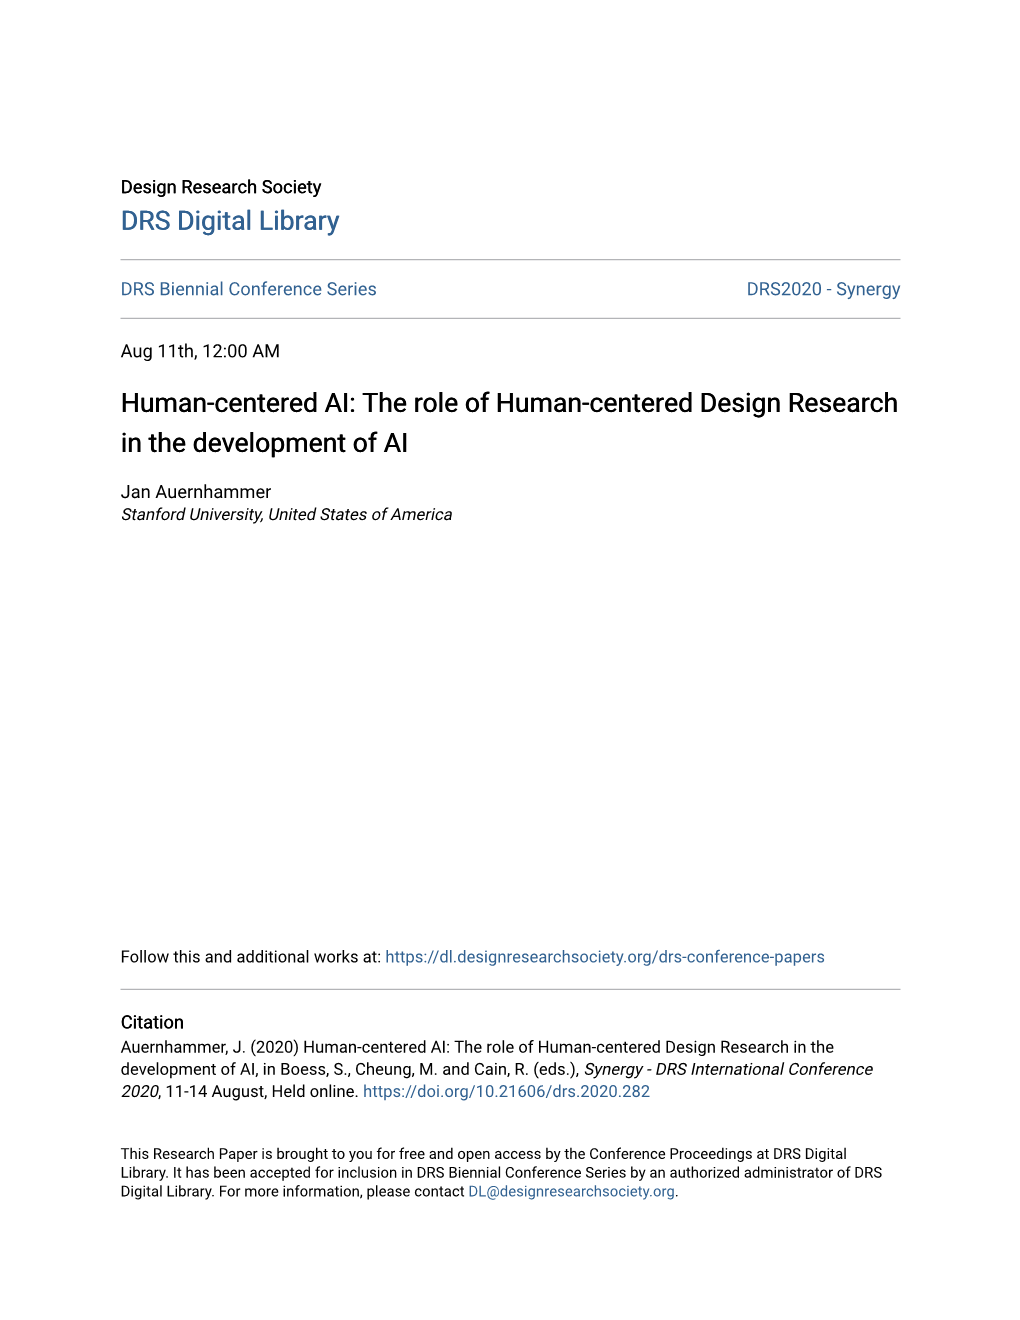 Human-Centered AI: the Role of Human-Centered Design Research in the Development of AI